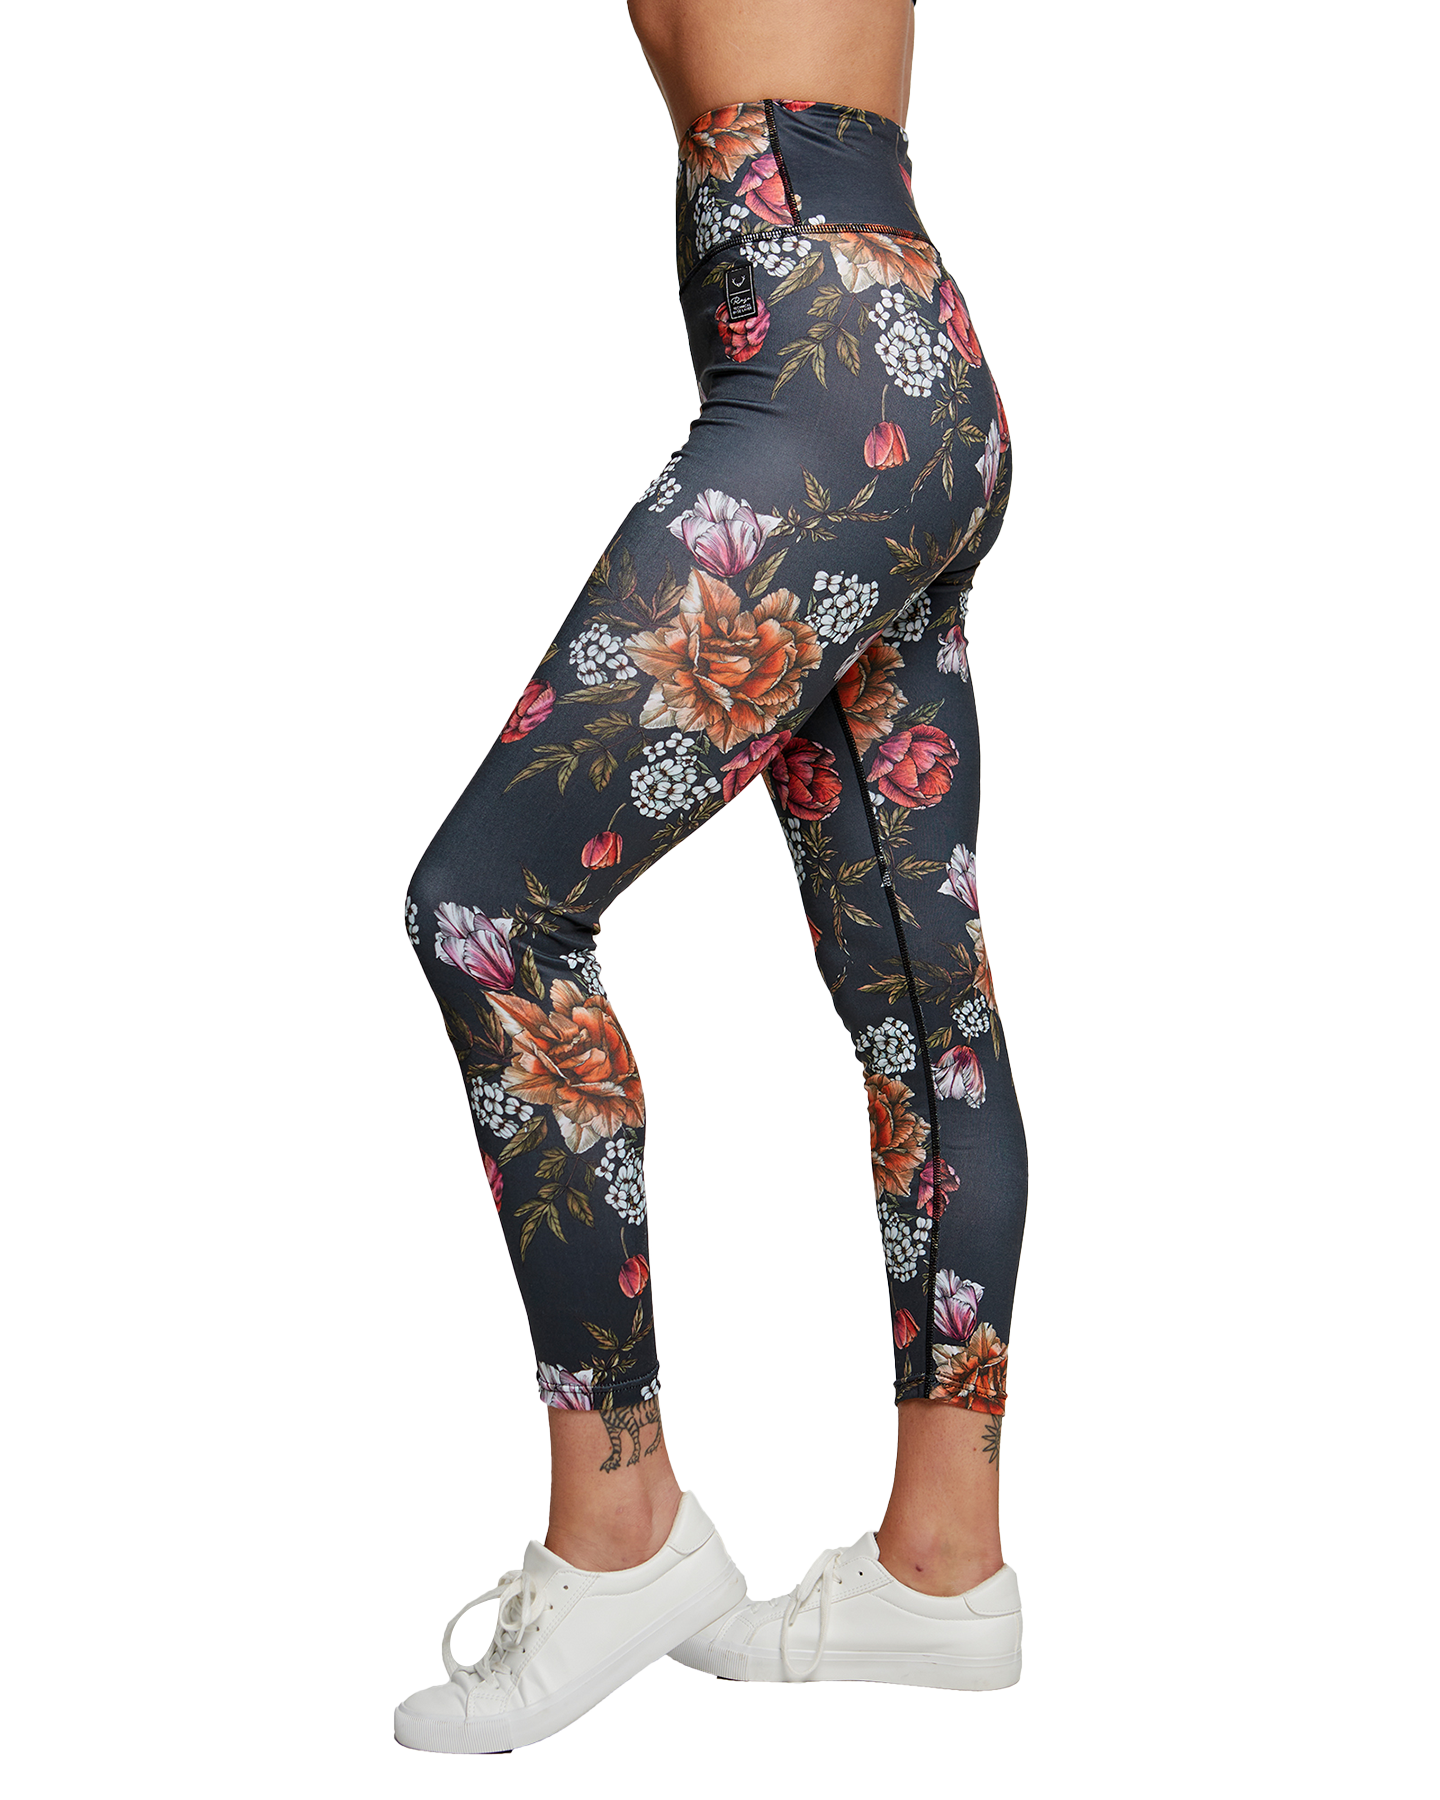 Rojo Tranquility Park 7/8 Women's Thermal Pants Women's Thermals - SnowSkiersWarehouse